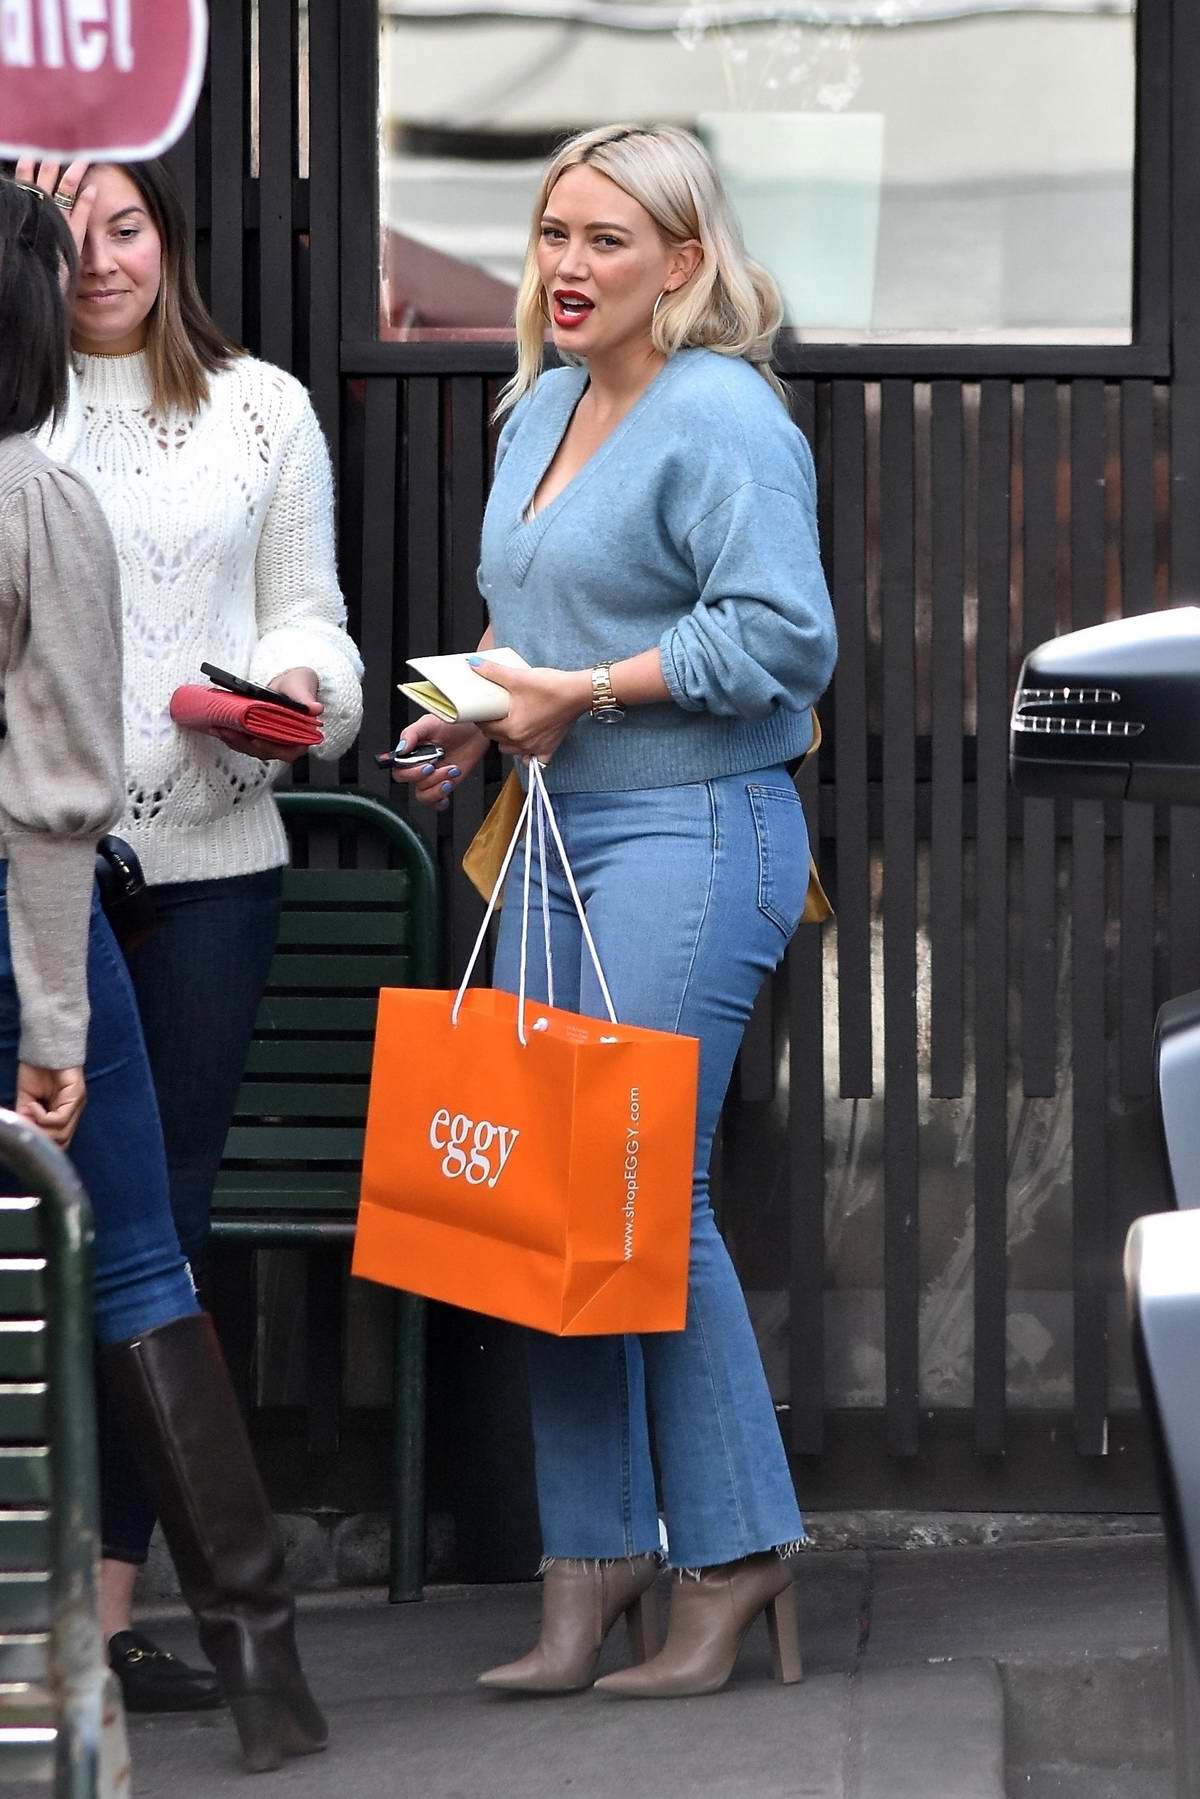 Hilary Duff wore a blue sweater and jeans as she grabs lunch with her